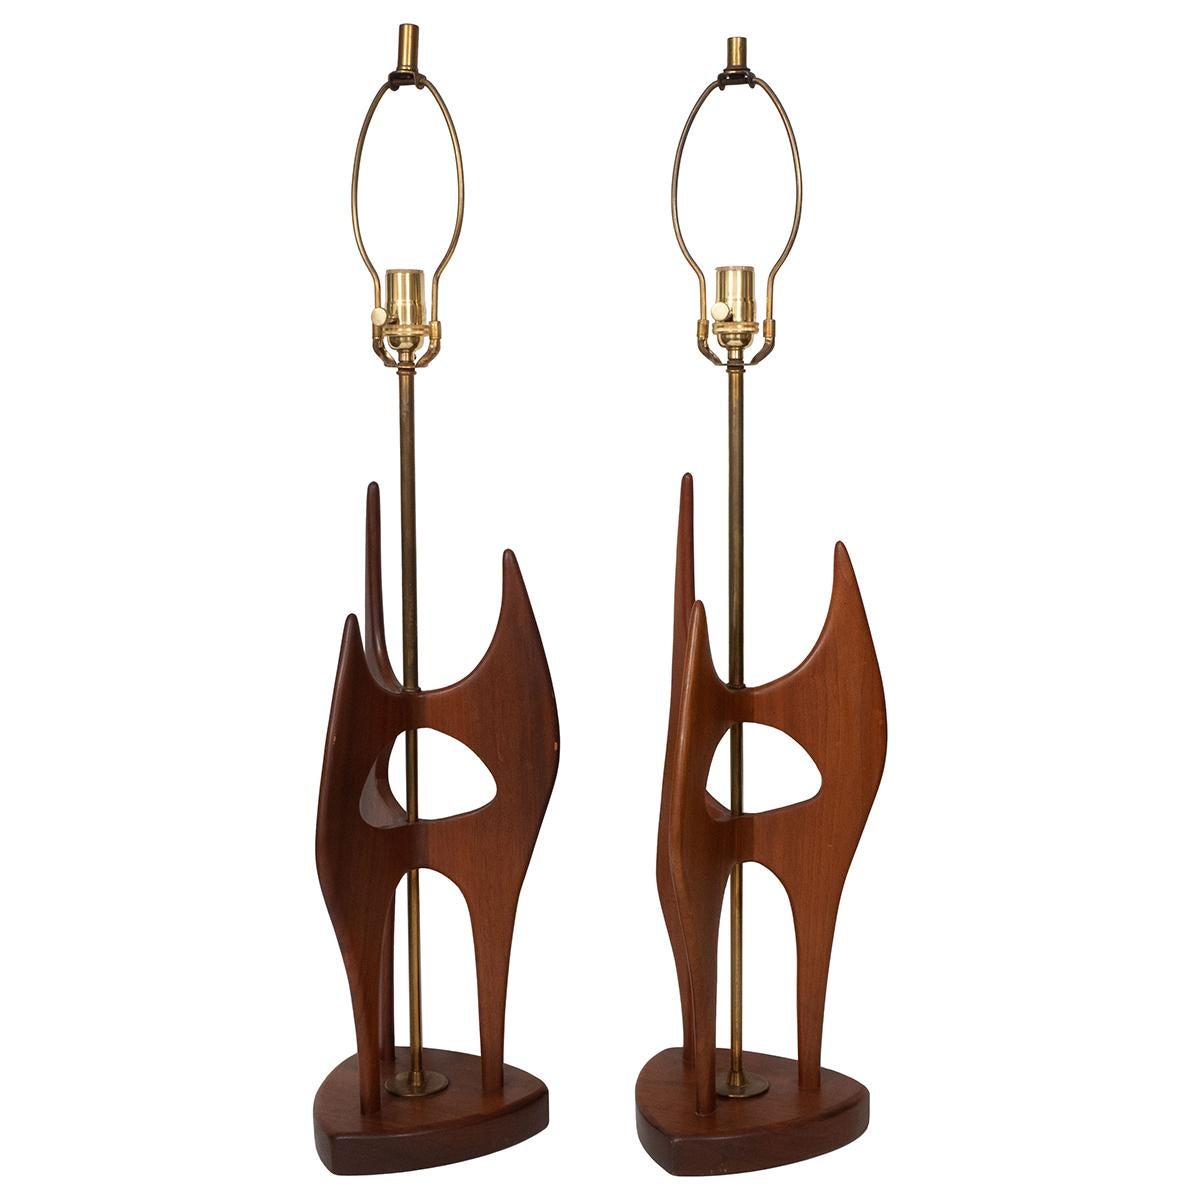 Pair of abstract, sculptural walnut wood table lamps with brass hardware. Please note color difference between the two.